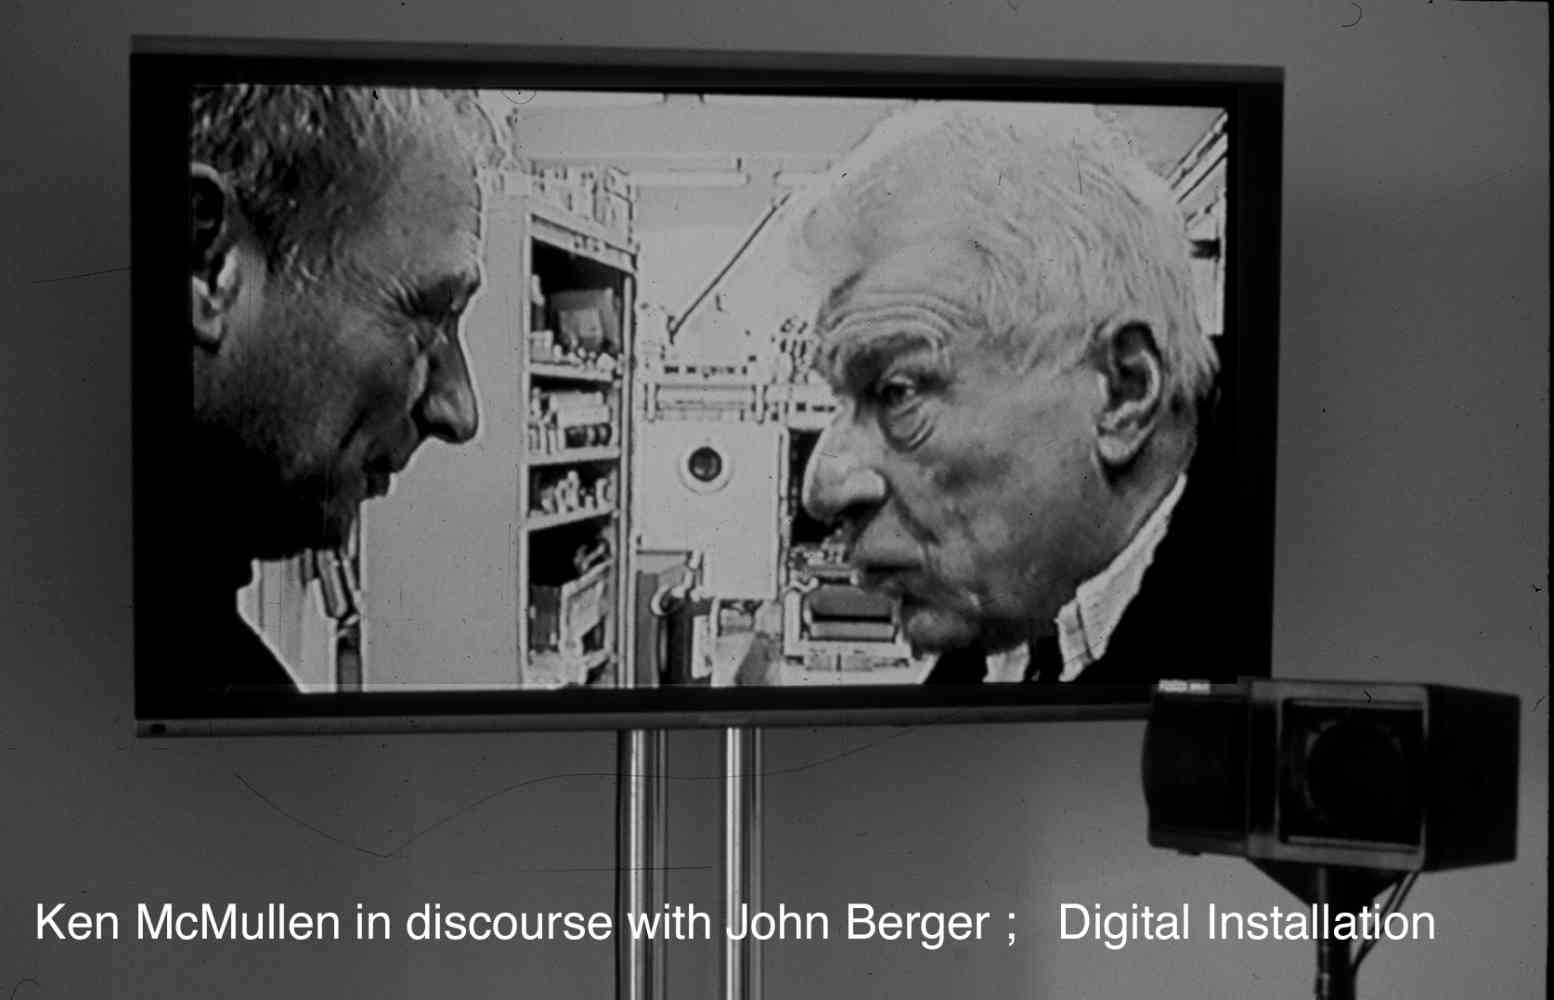 Gallery Installation. 60 mins continuous loop:   Atlantis Gallery London... (Research) - Documentary with John Berger 'The validity of Research in Art and Science'